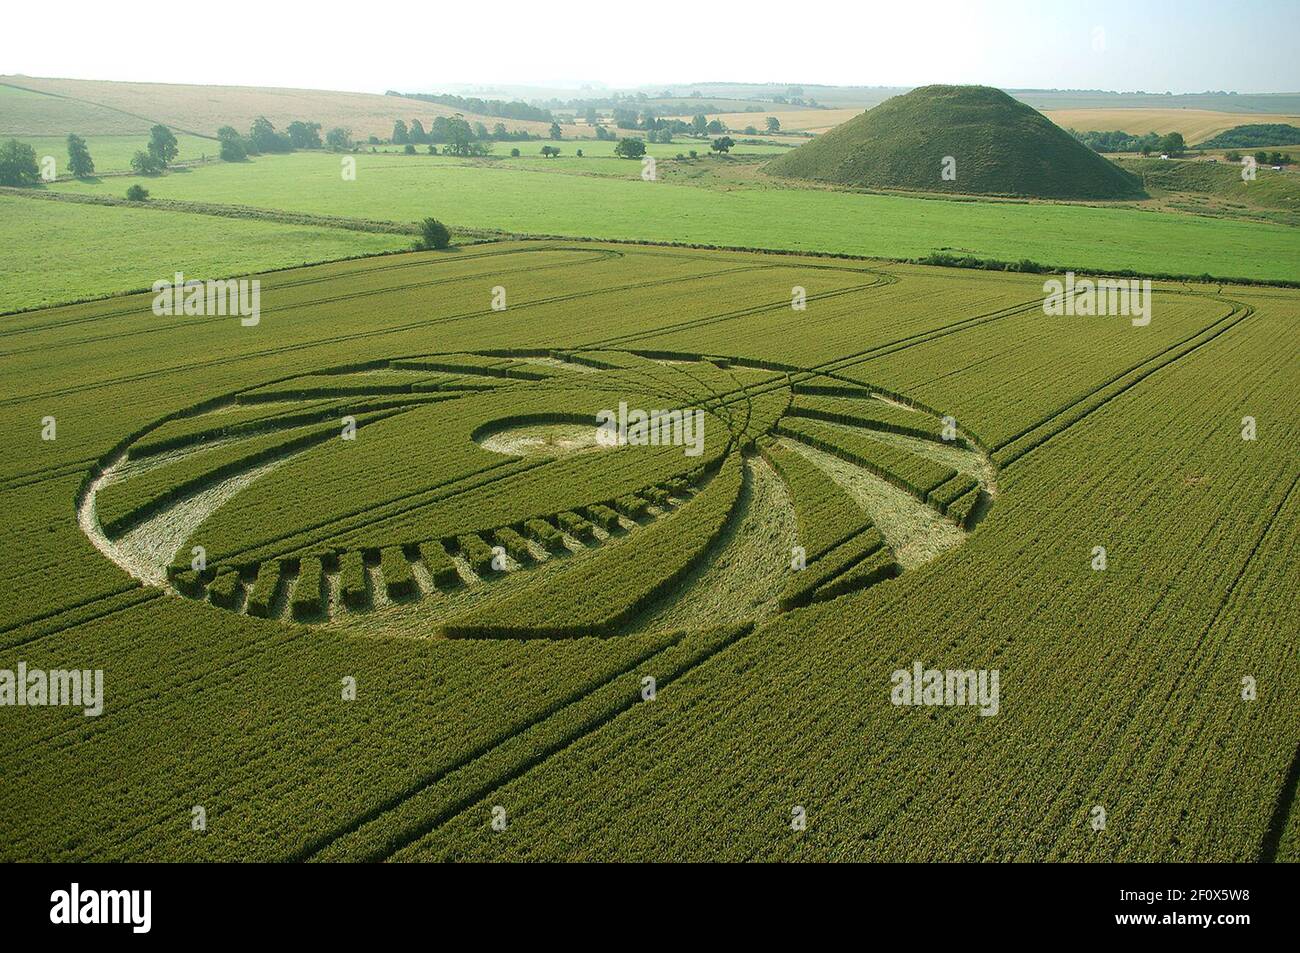 NEW CROP CIRCLE AT SIDBURY HILL THE ANCIENT EARTH MOUND IN WILTSHIRE APPEARED  2005 Stock Photo